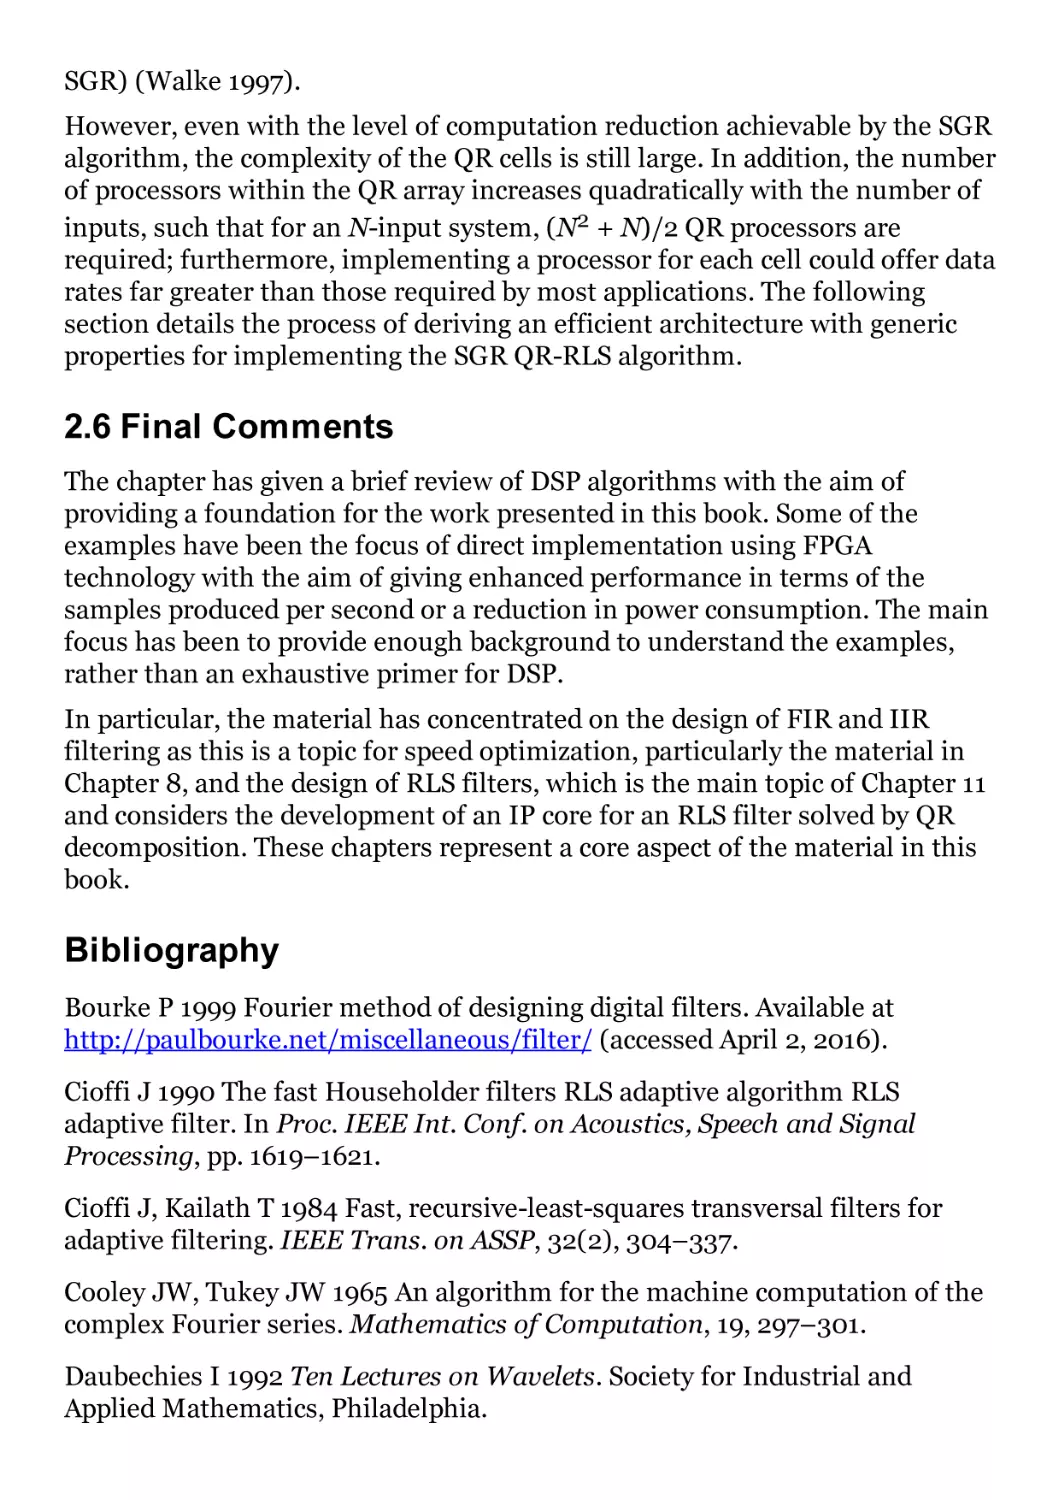 2.6 Final Comments
Bibliography